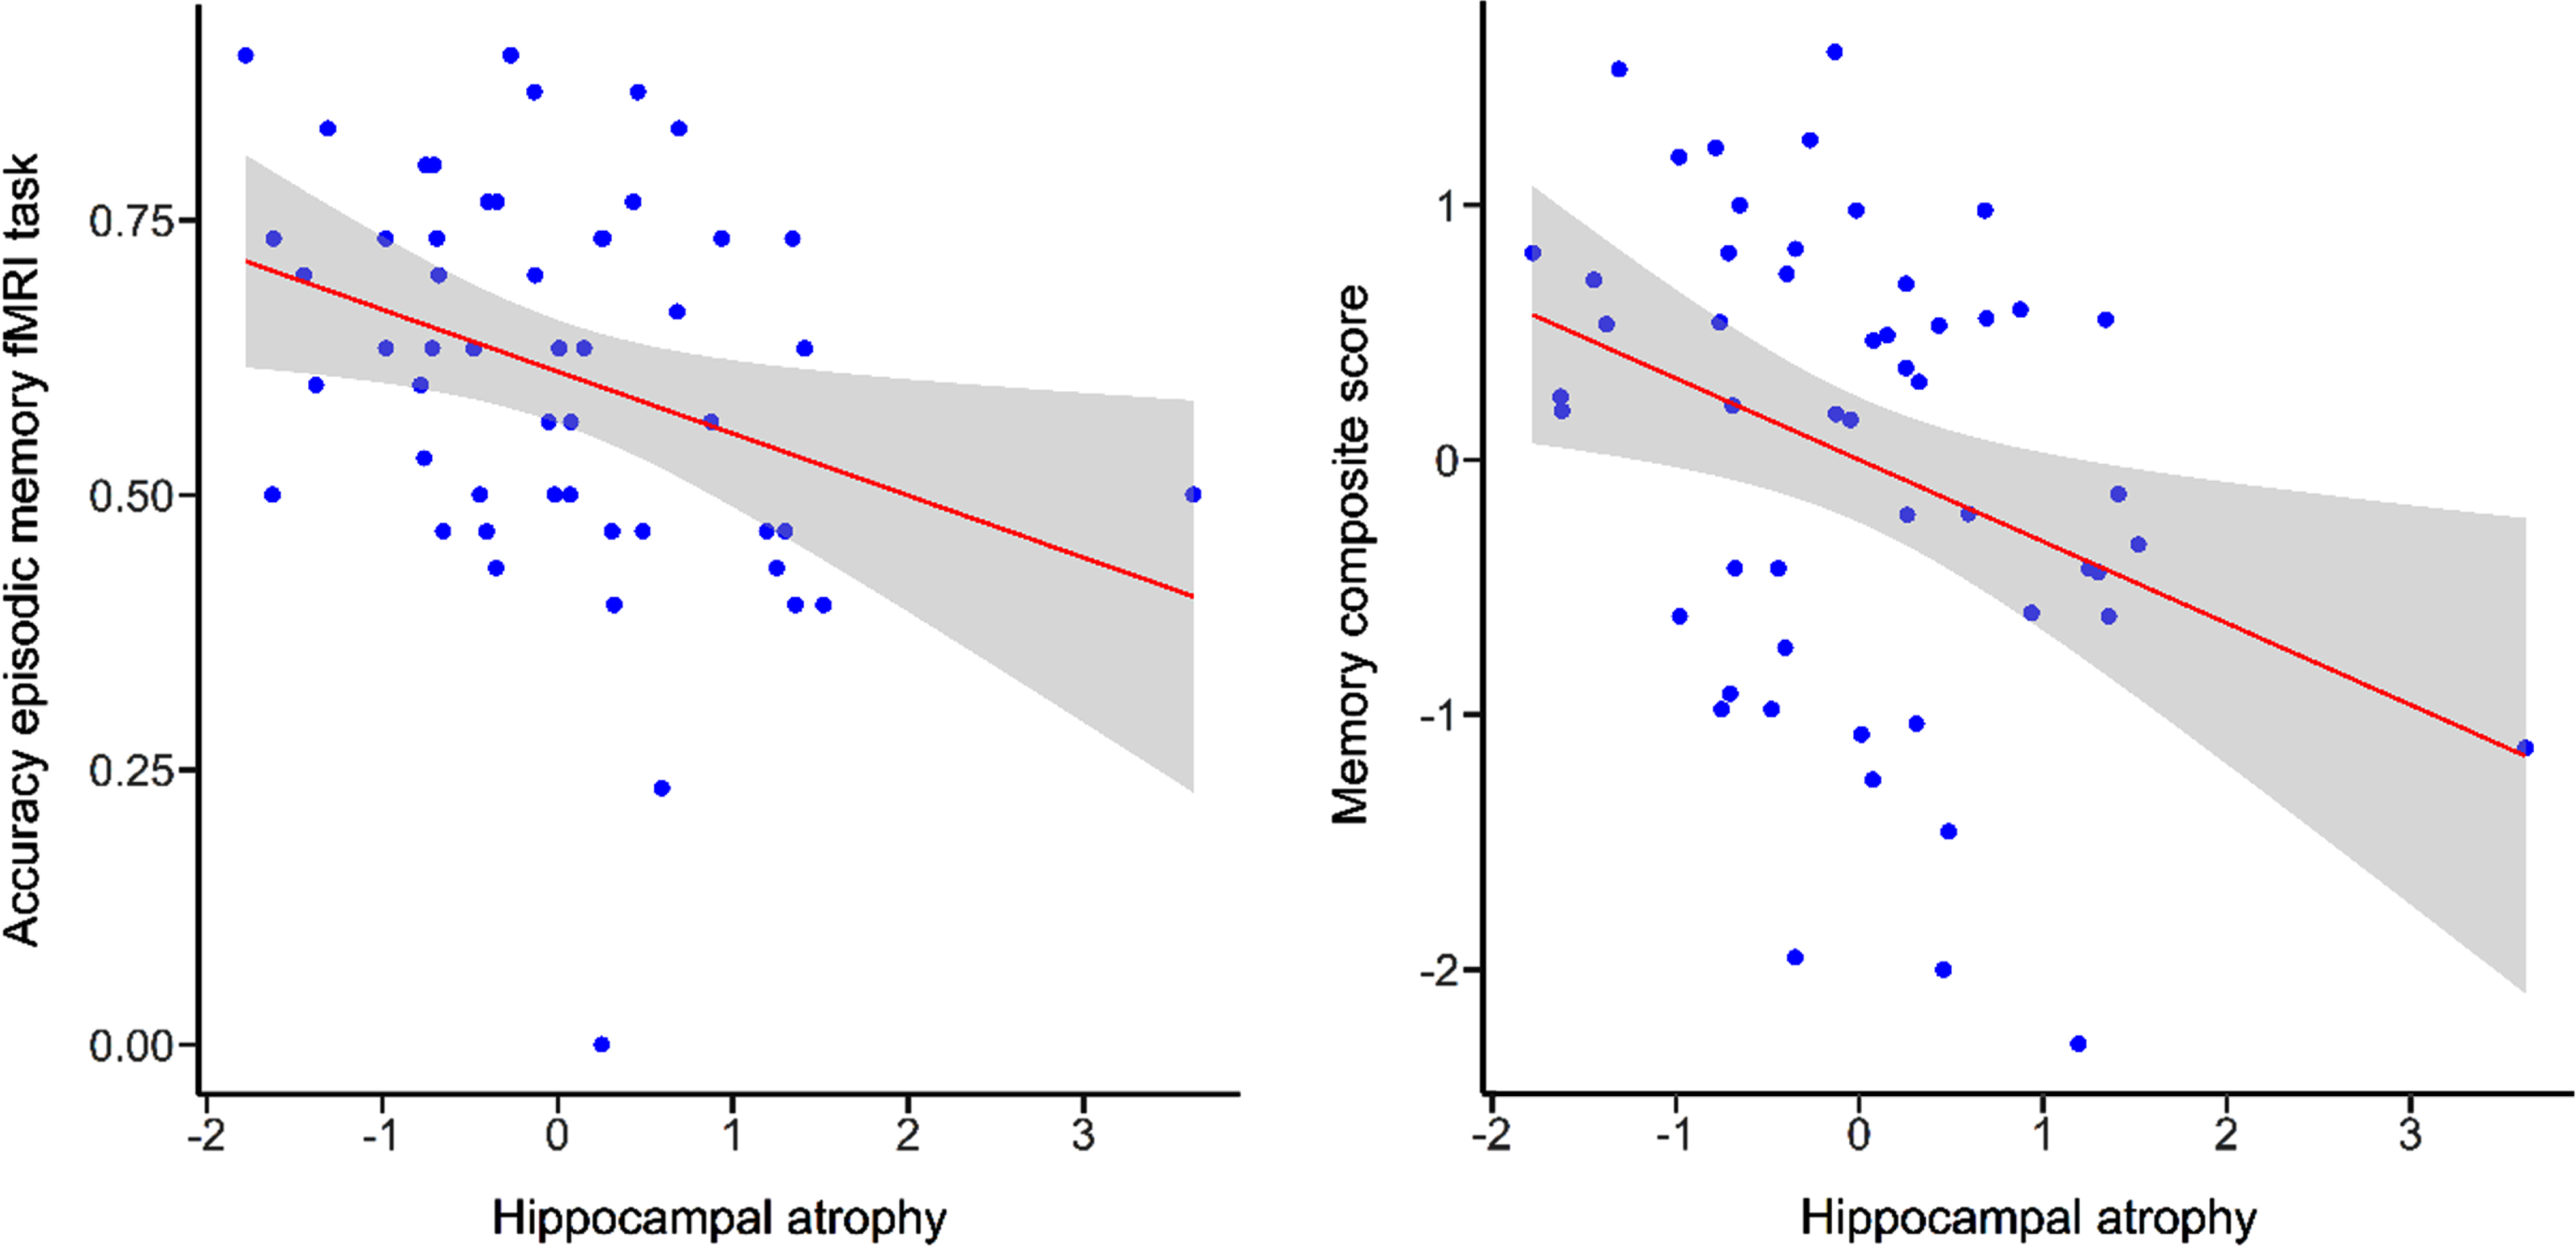 Scatterplots illustrating correlations for episodic memory fMRI task performance and memory composite score with hippocampal atrophy. Grey bands indicate standard errors.